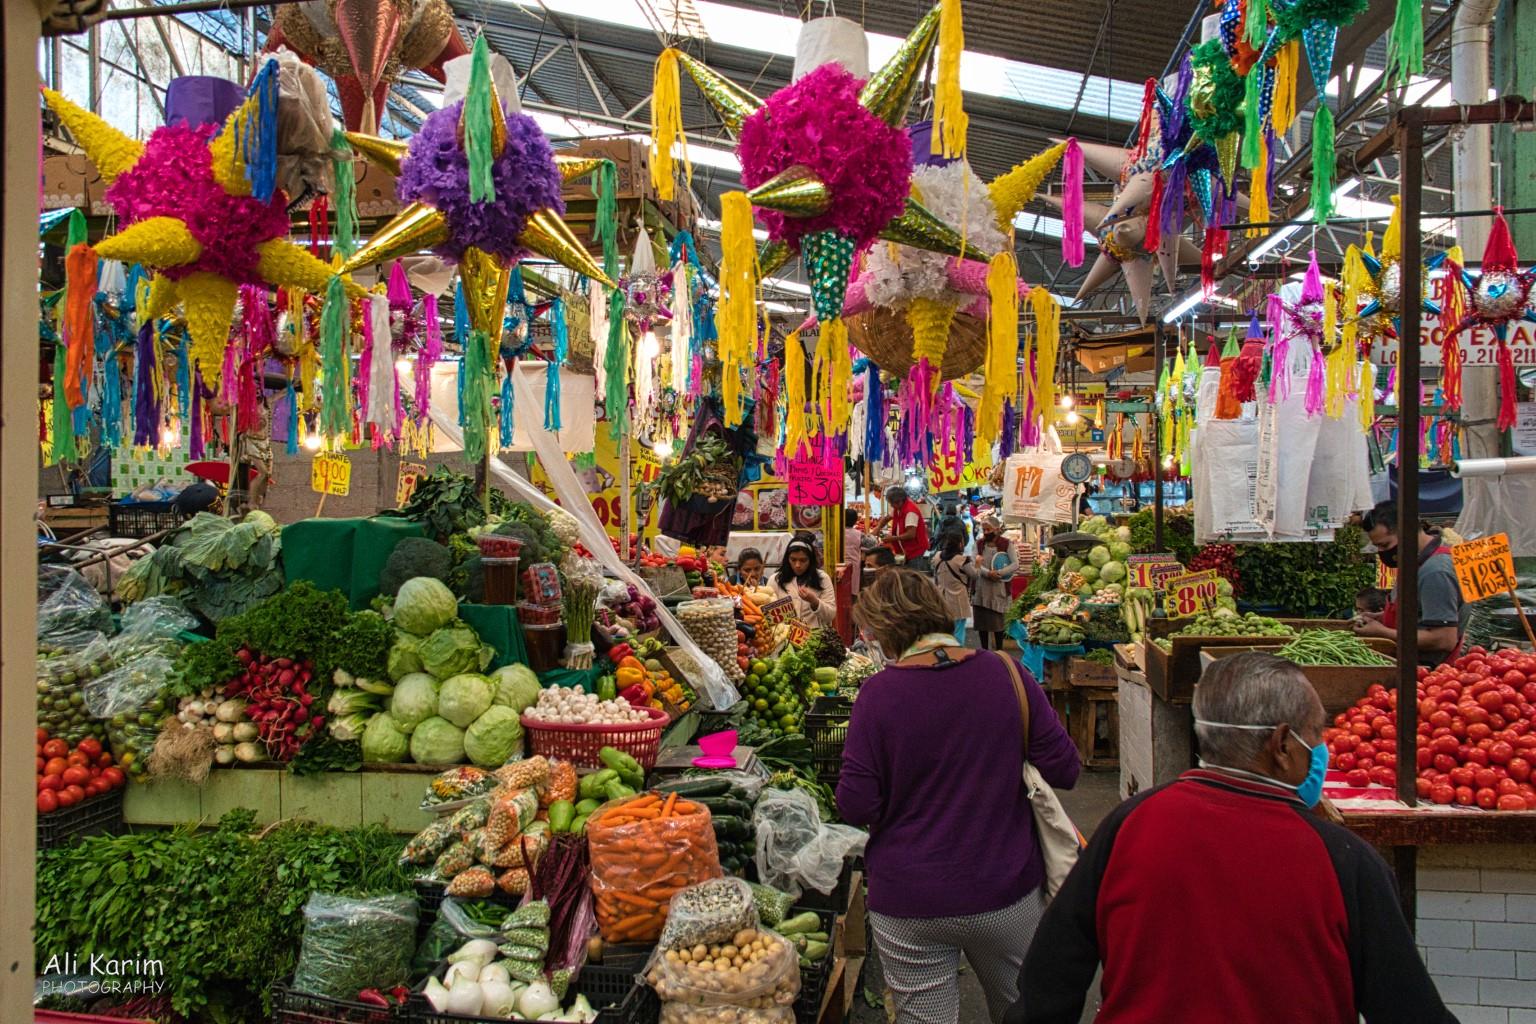 Puebla, Mexico Dec 2020, No visit is complete without a stop in the local market; very colorful and busy